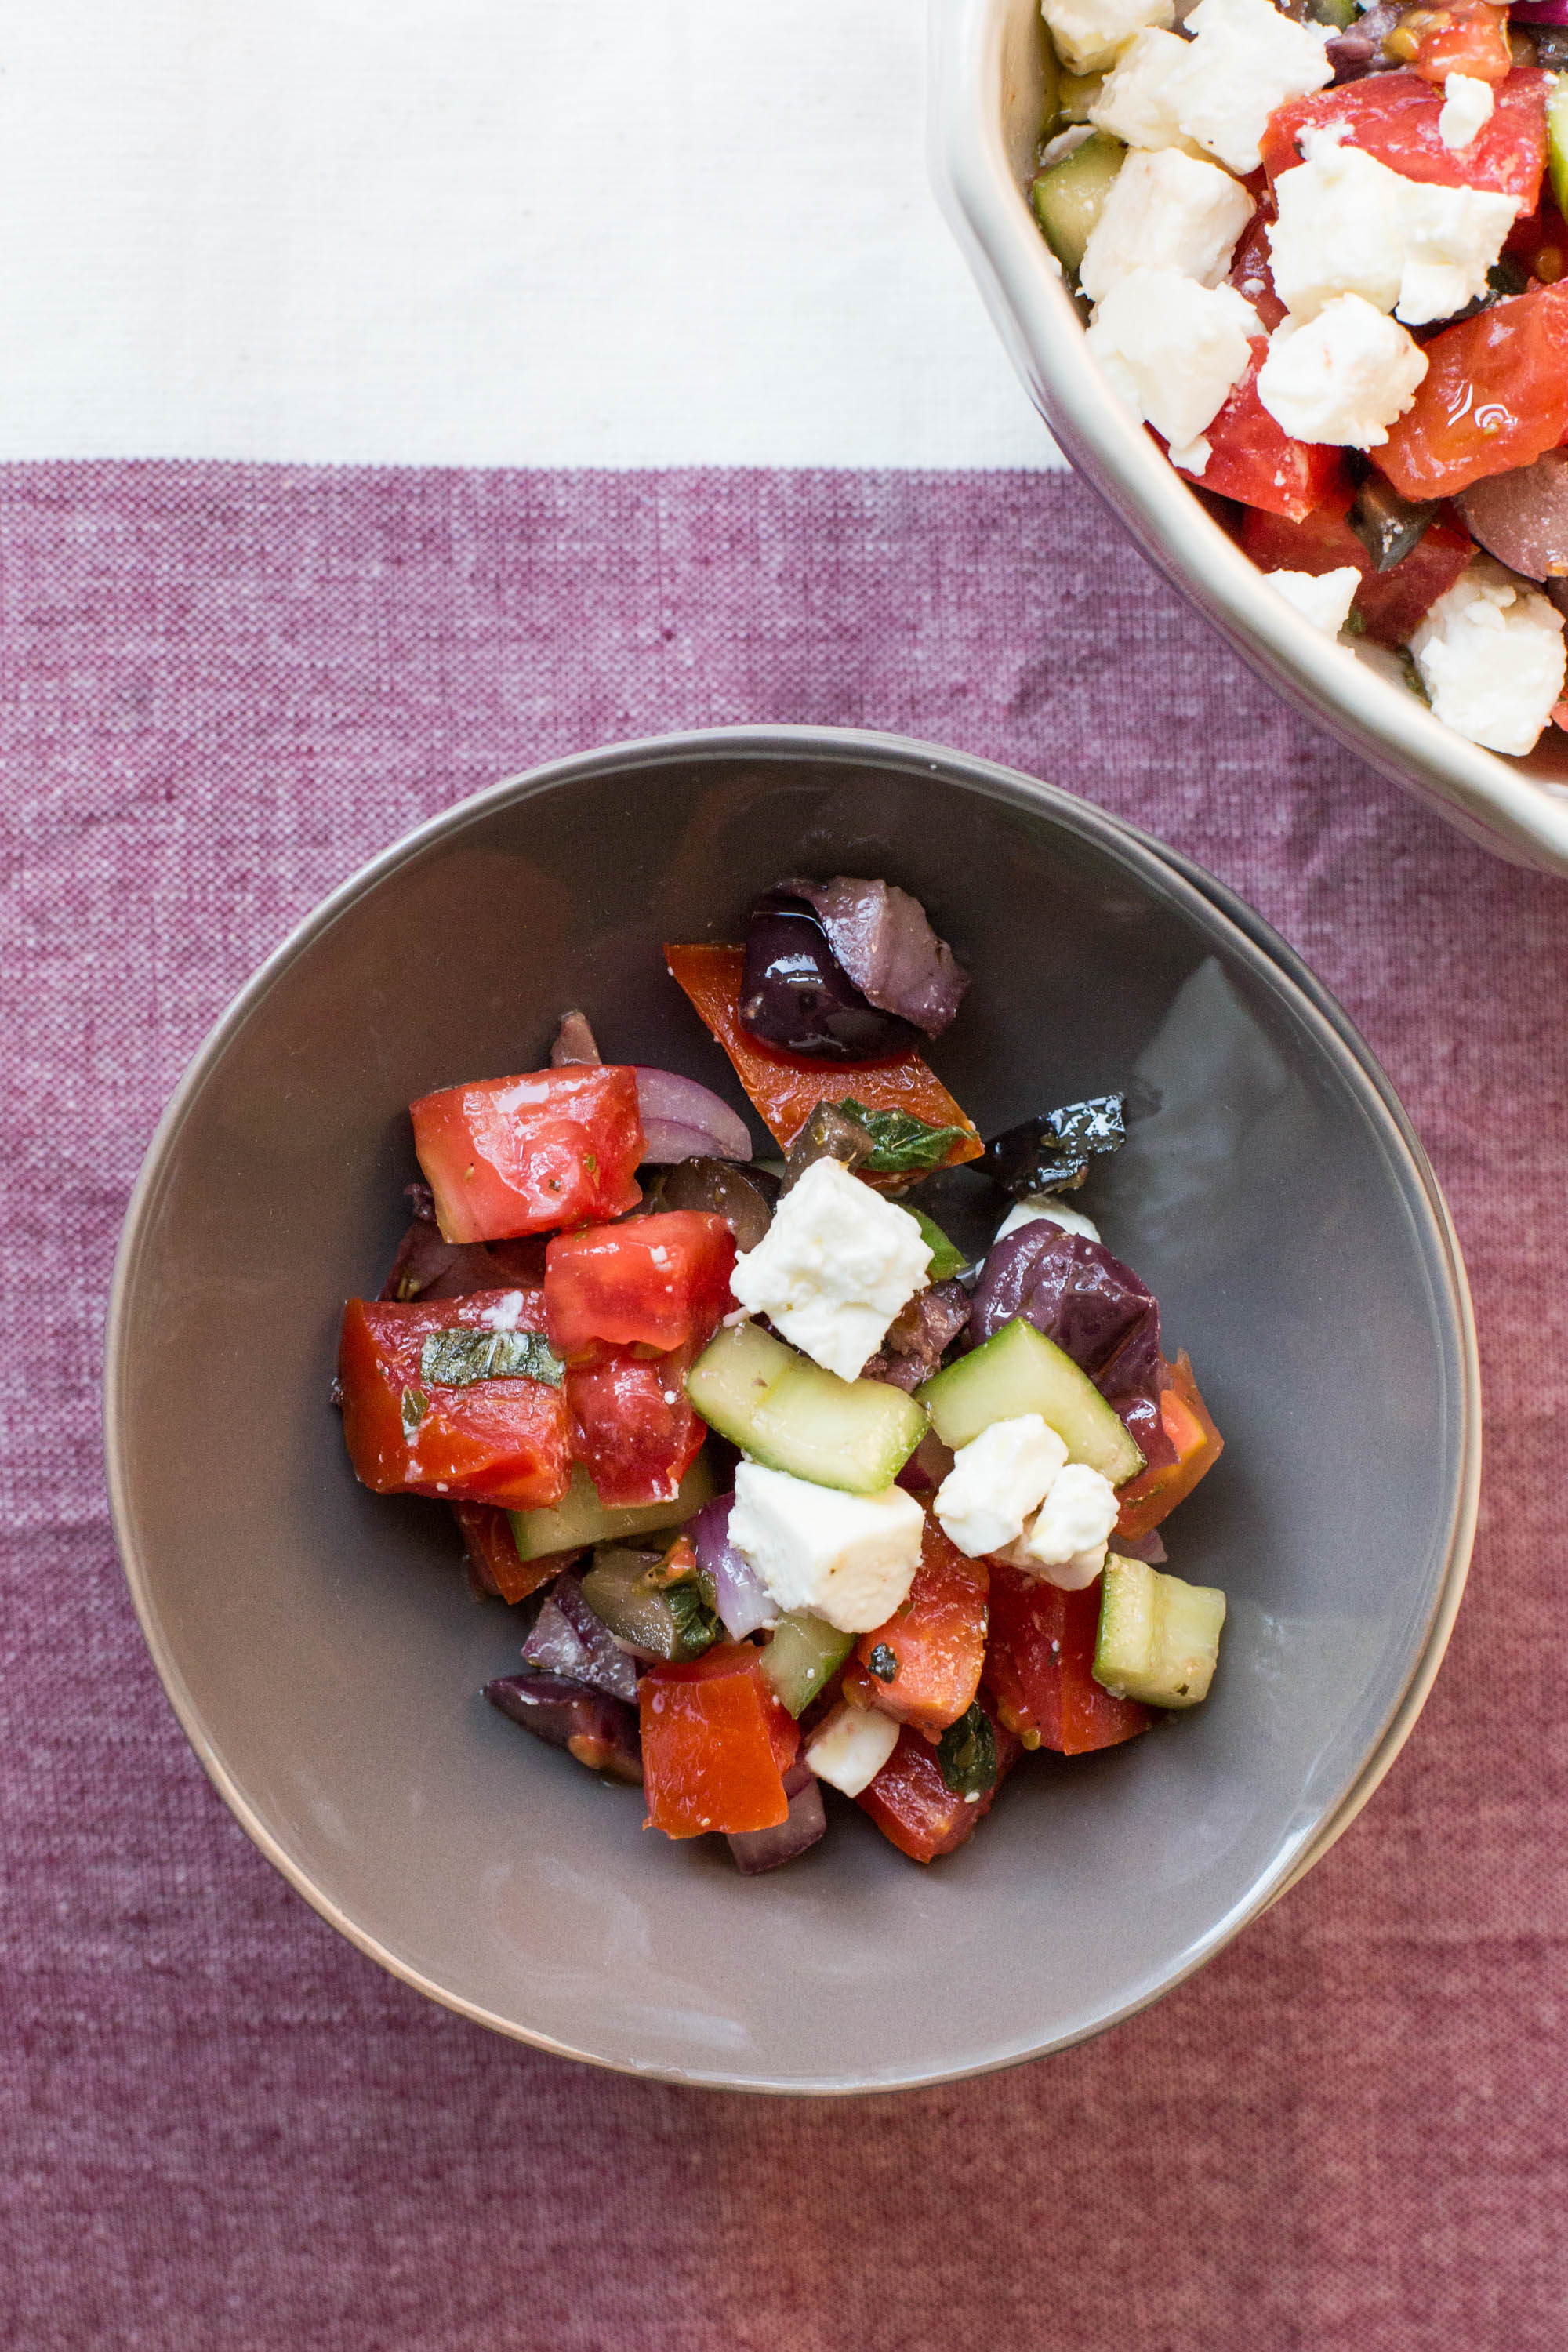 Greek Tomato and Cucumber Salad in bowl on burgundy tablecloth.